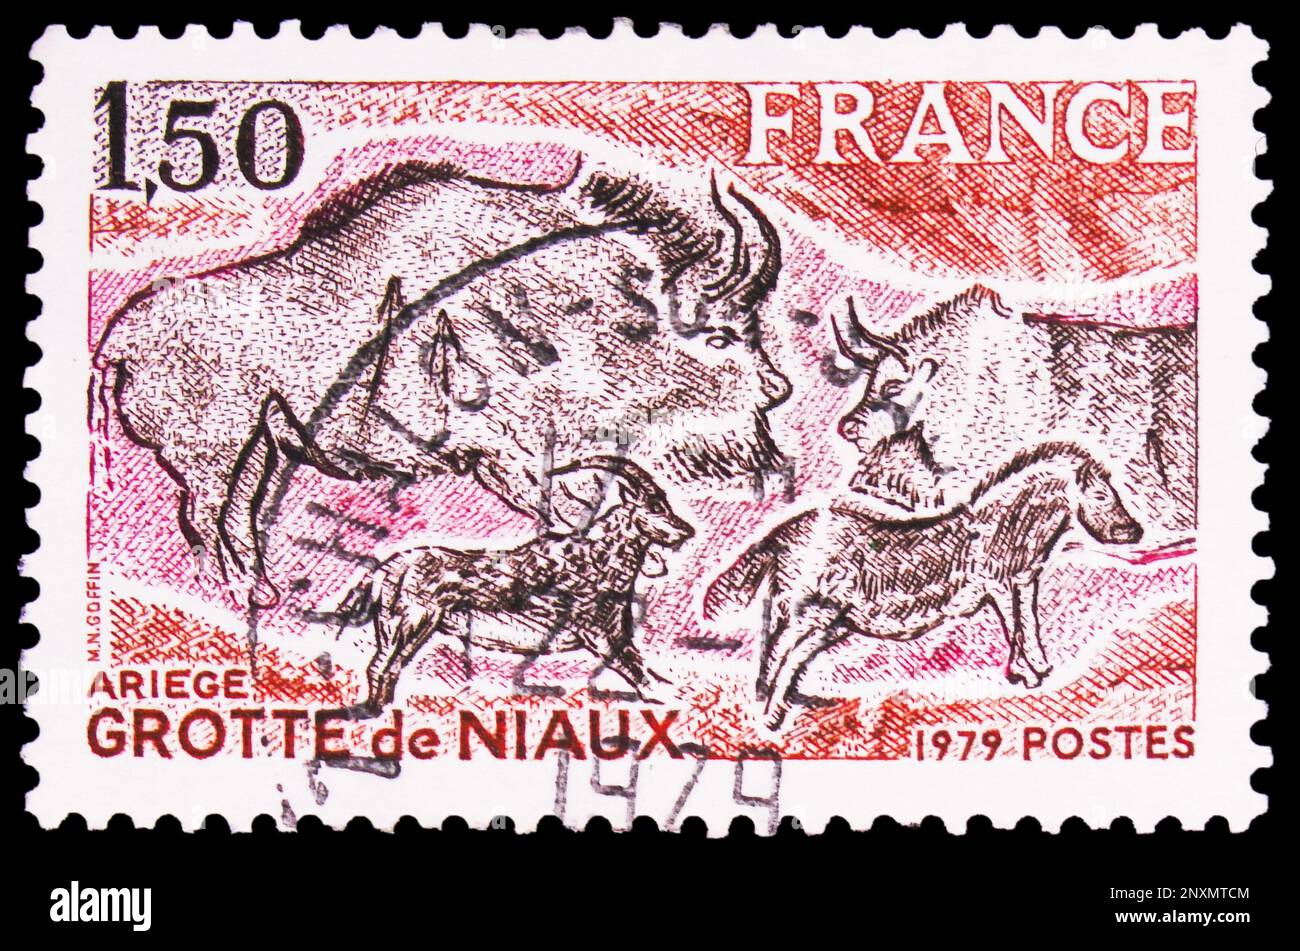 MOSCOW, RUSSIA - FEBRUARY 15, 2023: Postage stamp printed in France shows Niaux cave - Ariege, Tourism serie, circa 1979 Stock Photo